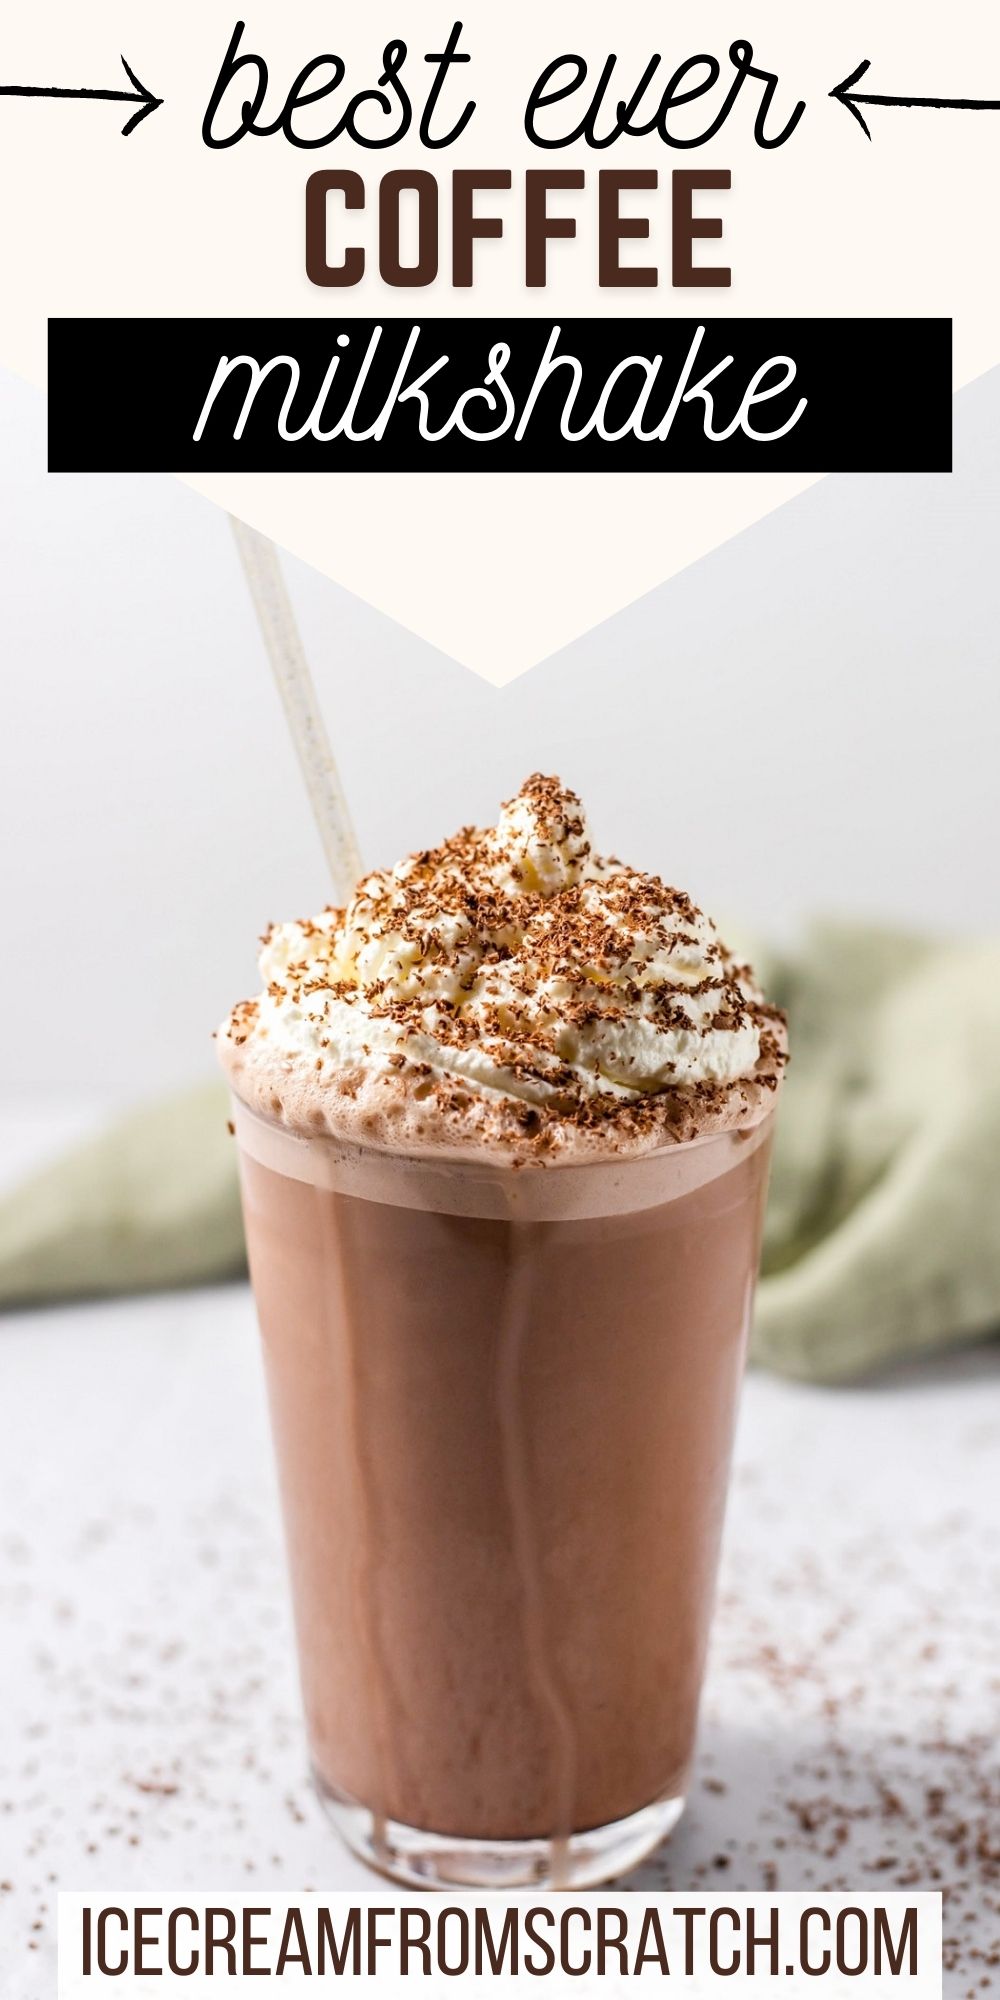 A pint glass filled with a coffee milkshake with whipped cream and chocolate shavings. Text at top of image says "best ever coffee milkshake"